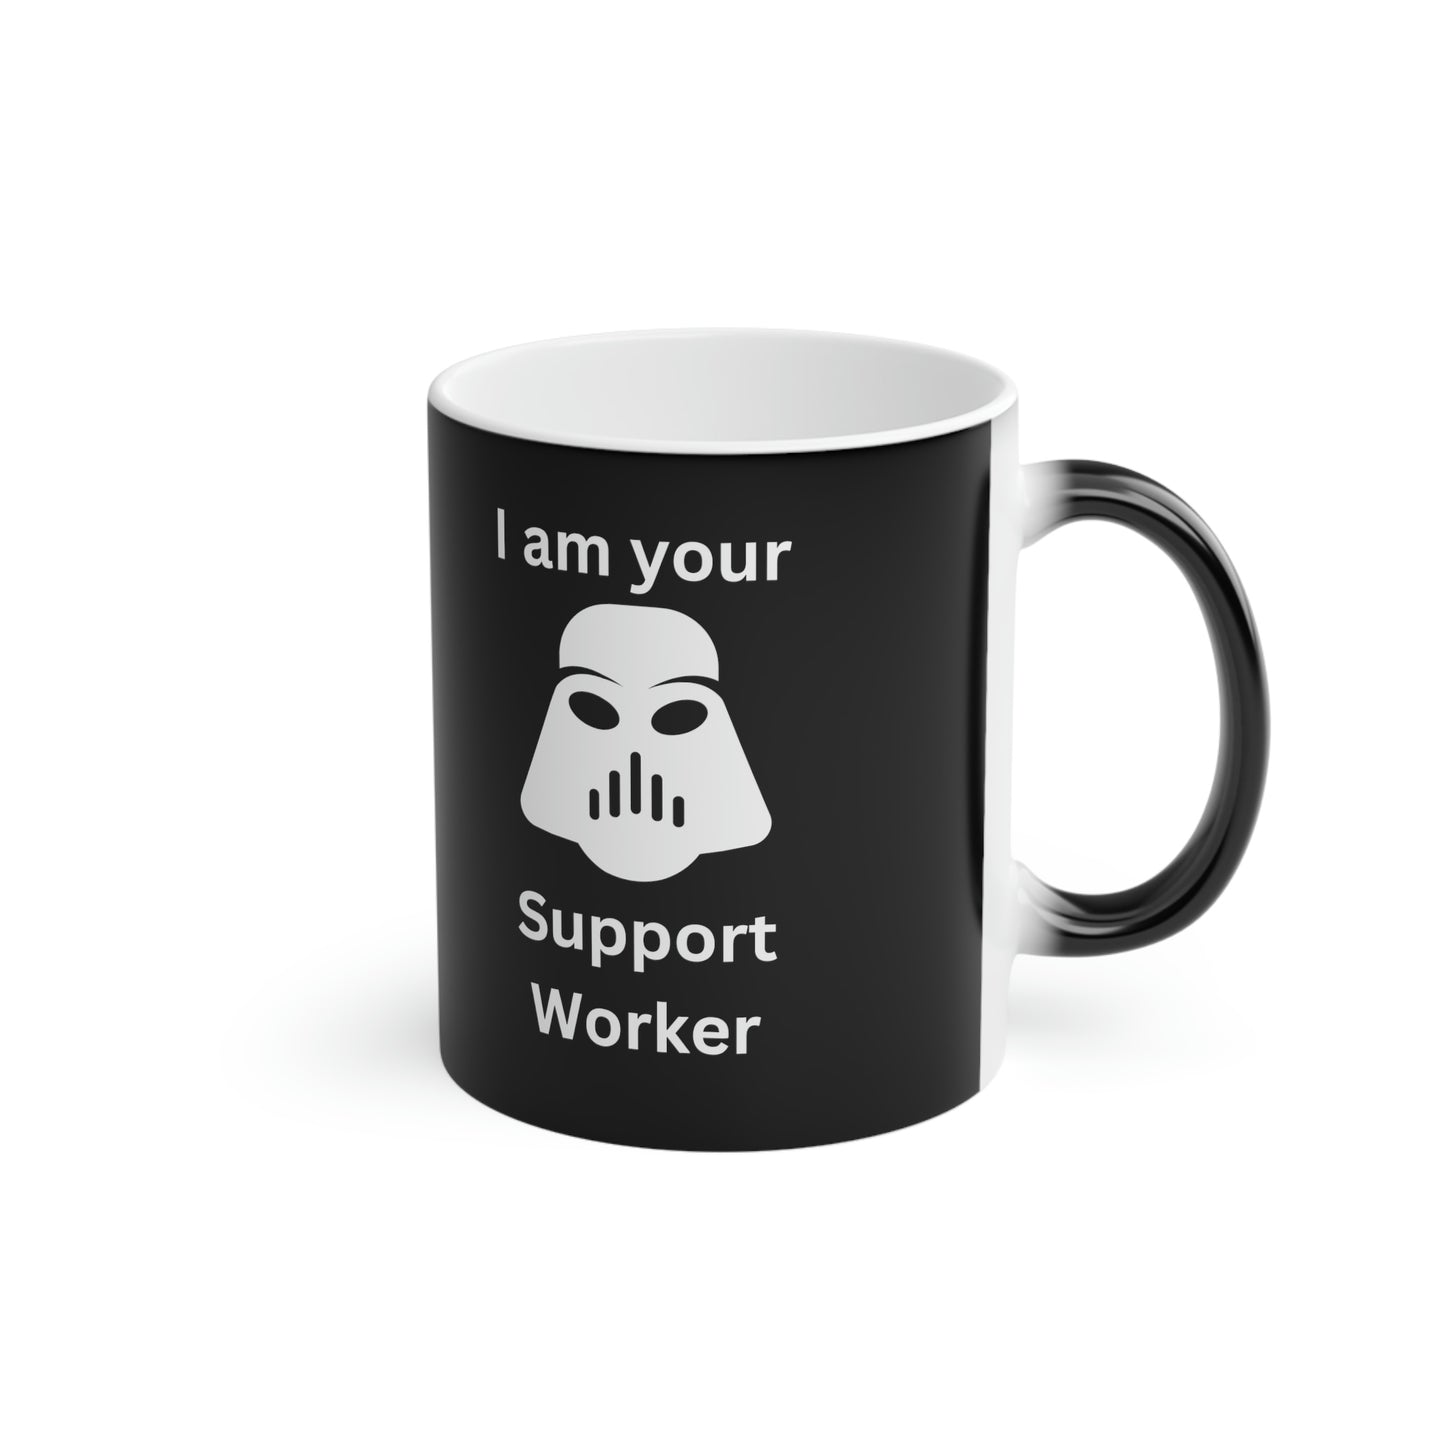 I am your Support Worker